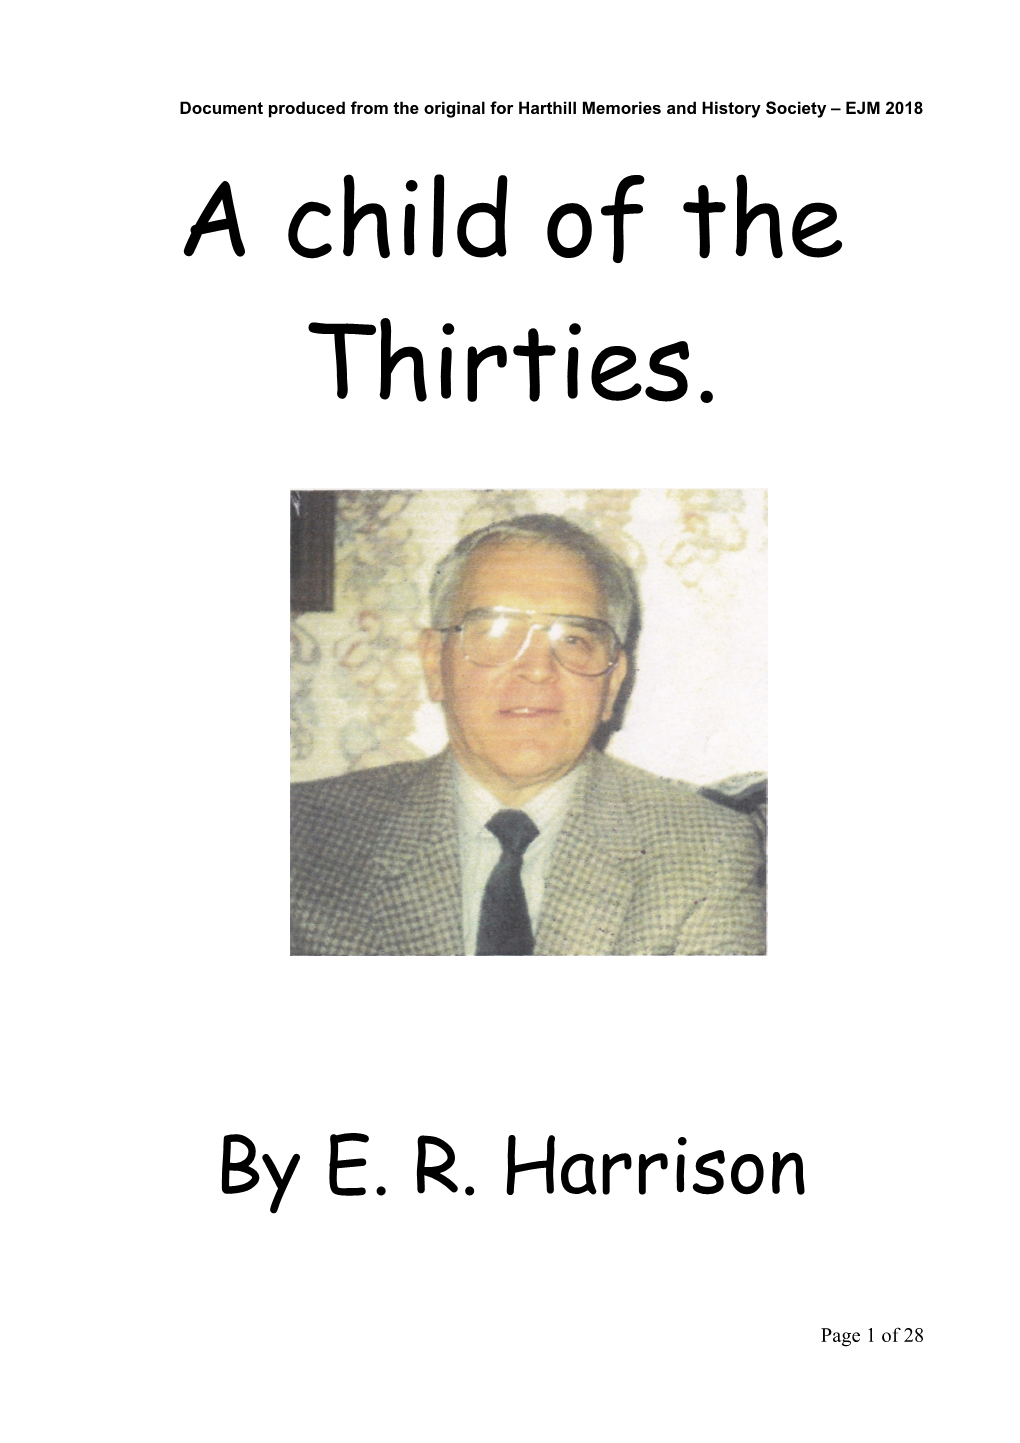 A Child of the Thirties